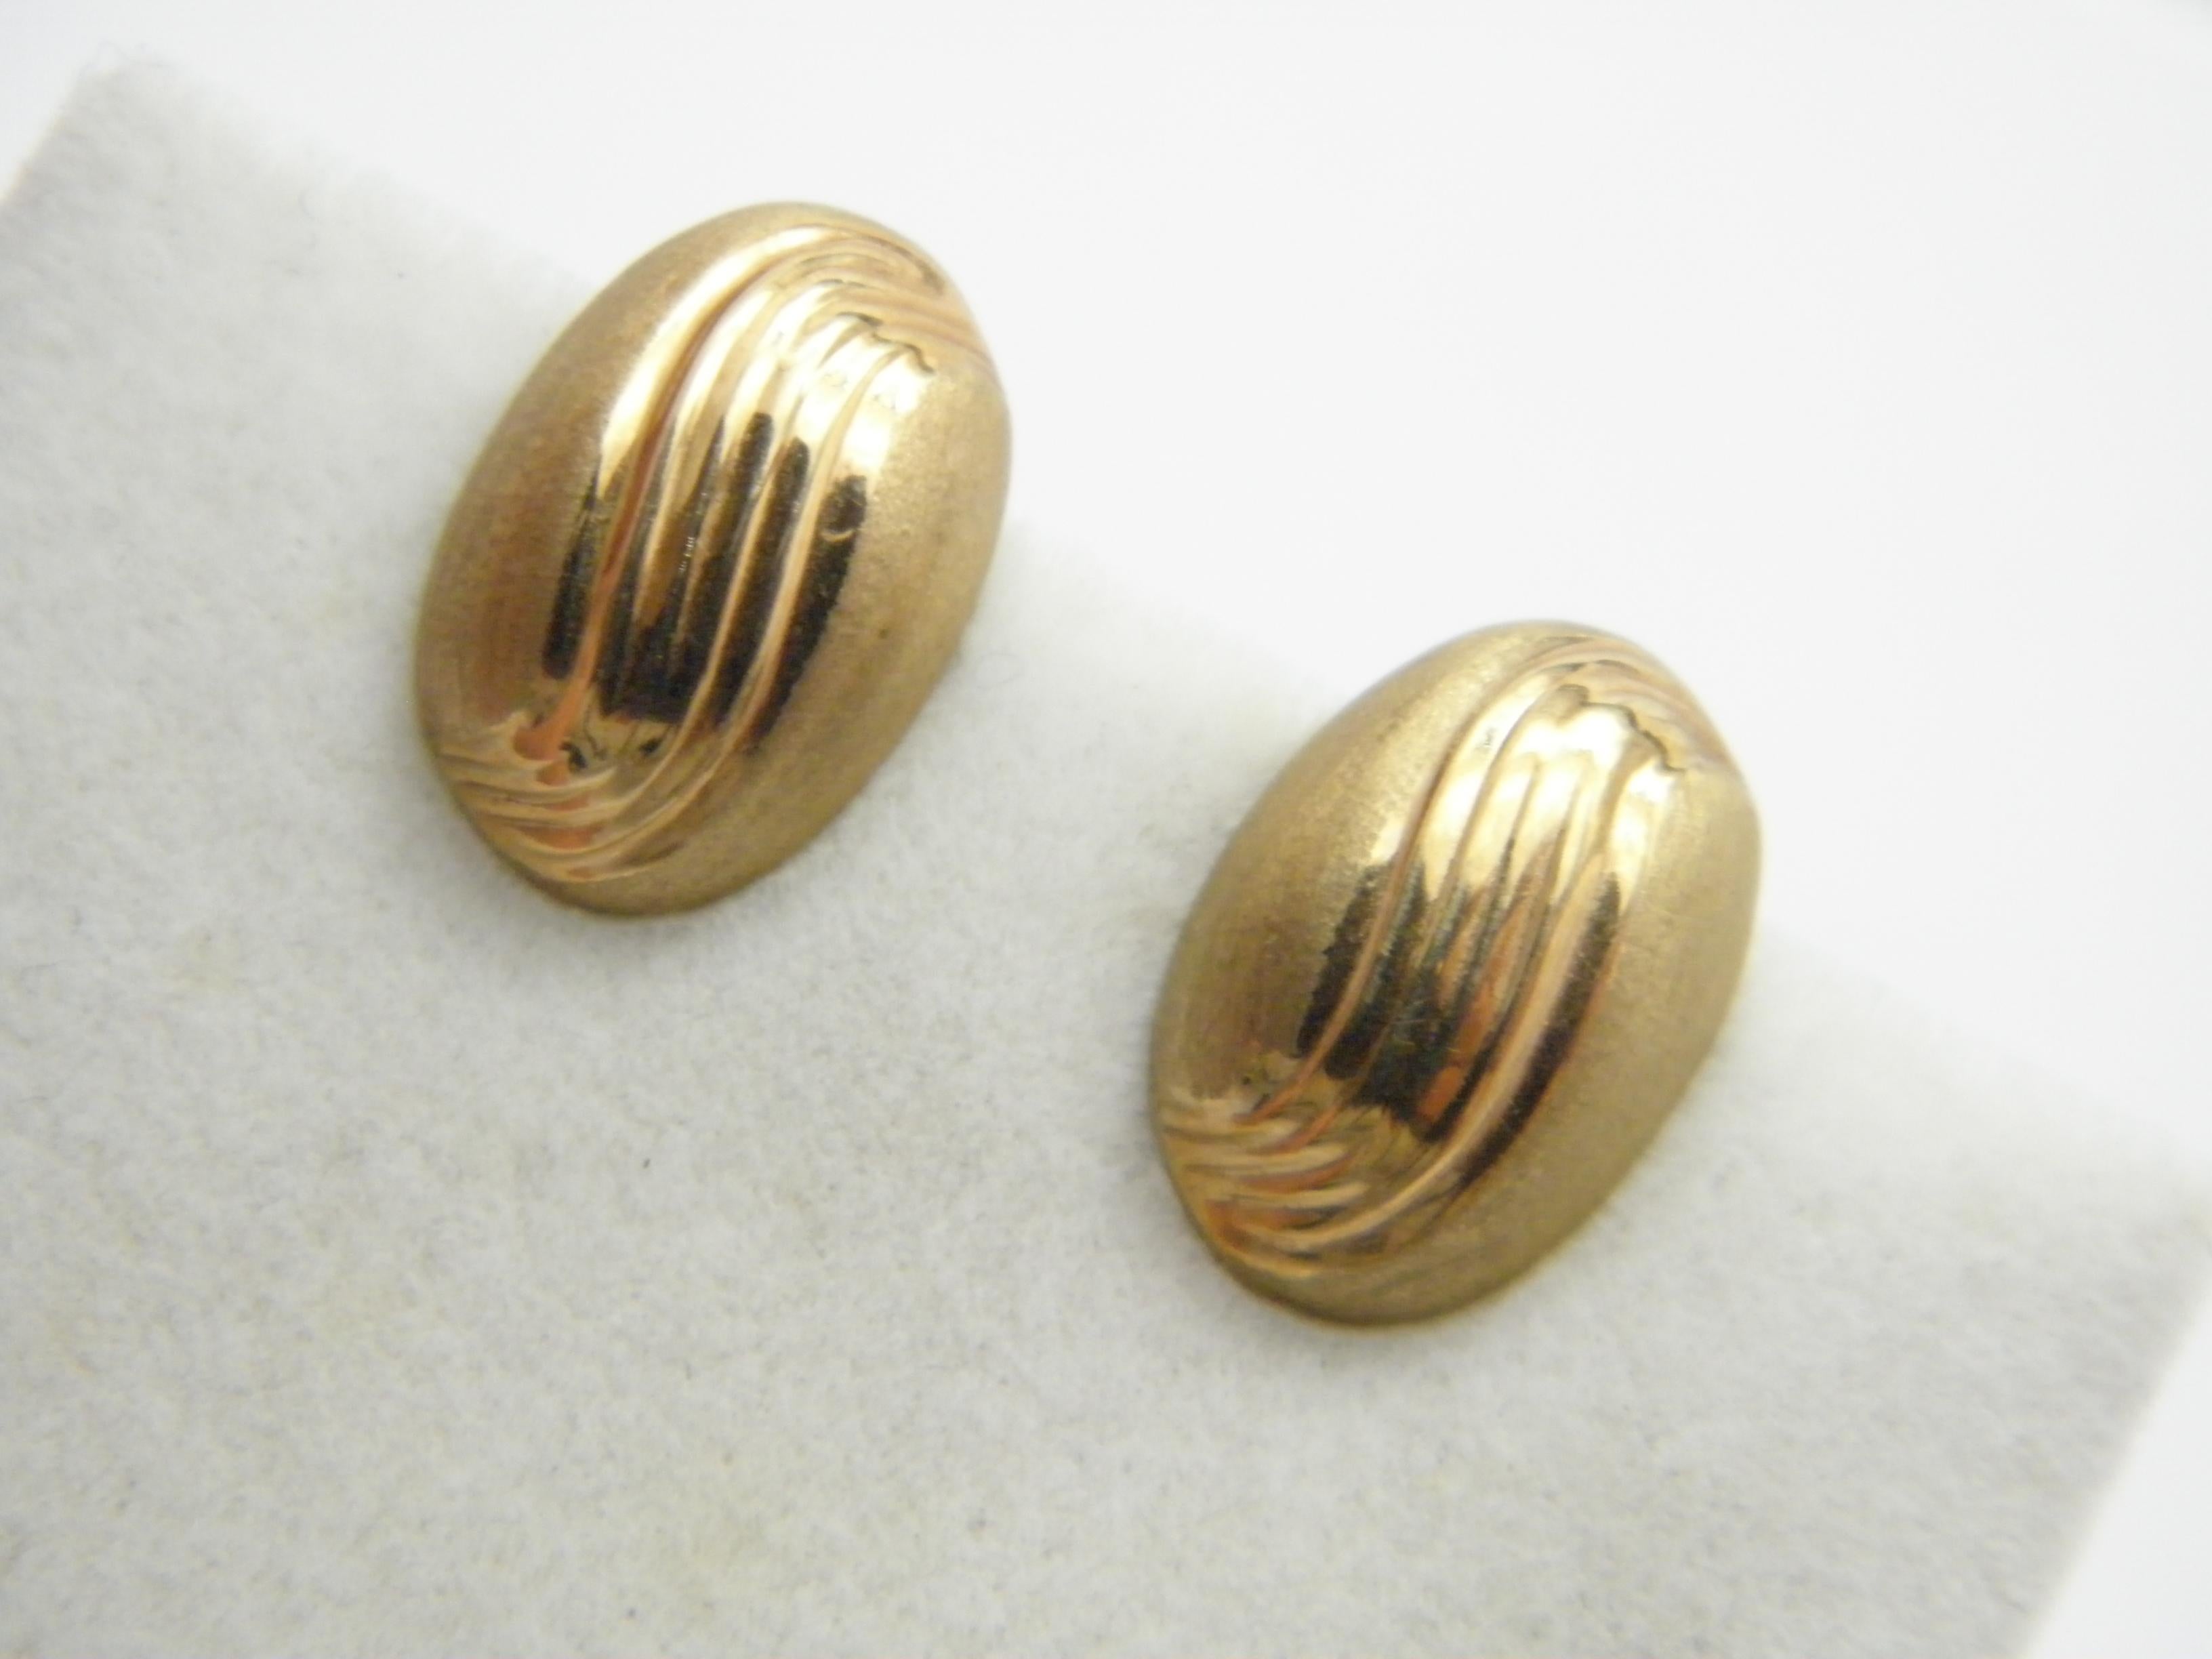 A very special item for you to consider:

9CT HEAVY GOLD COFFEE BEAN CLIP ON EARRINGS

DETAILS
Material: 375/000 9ct Solid Gold
Style: Art Deco style clip ons with burnished and polished coffee bean design
Fastening: Hinged clips, very tight and